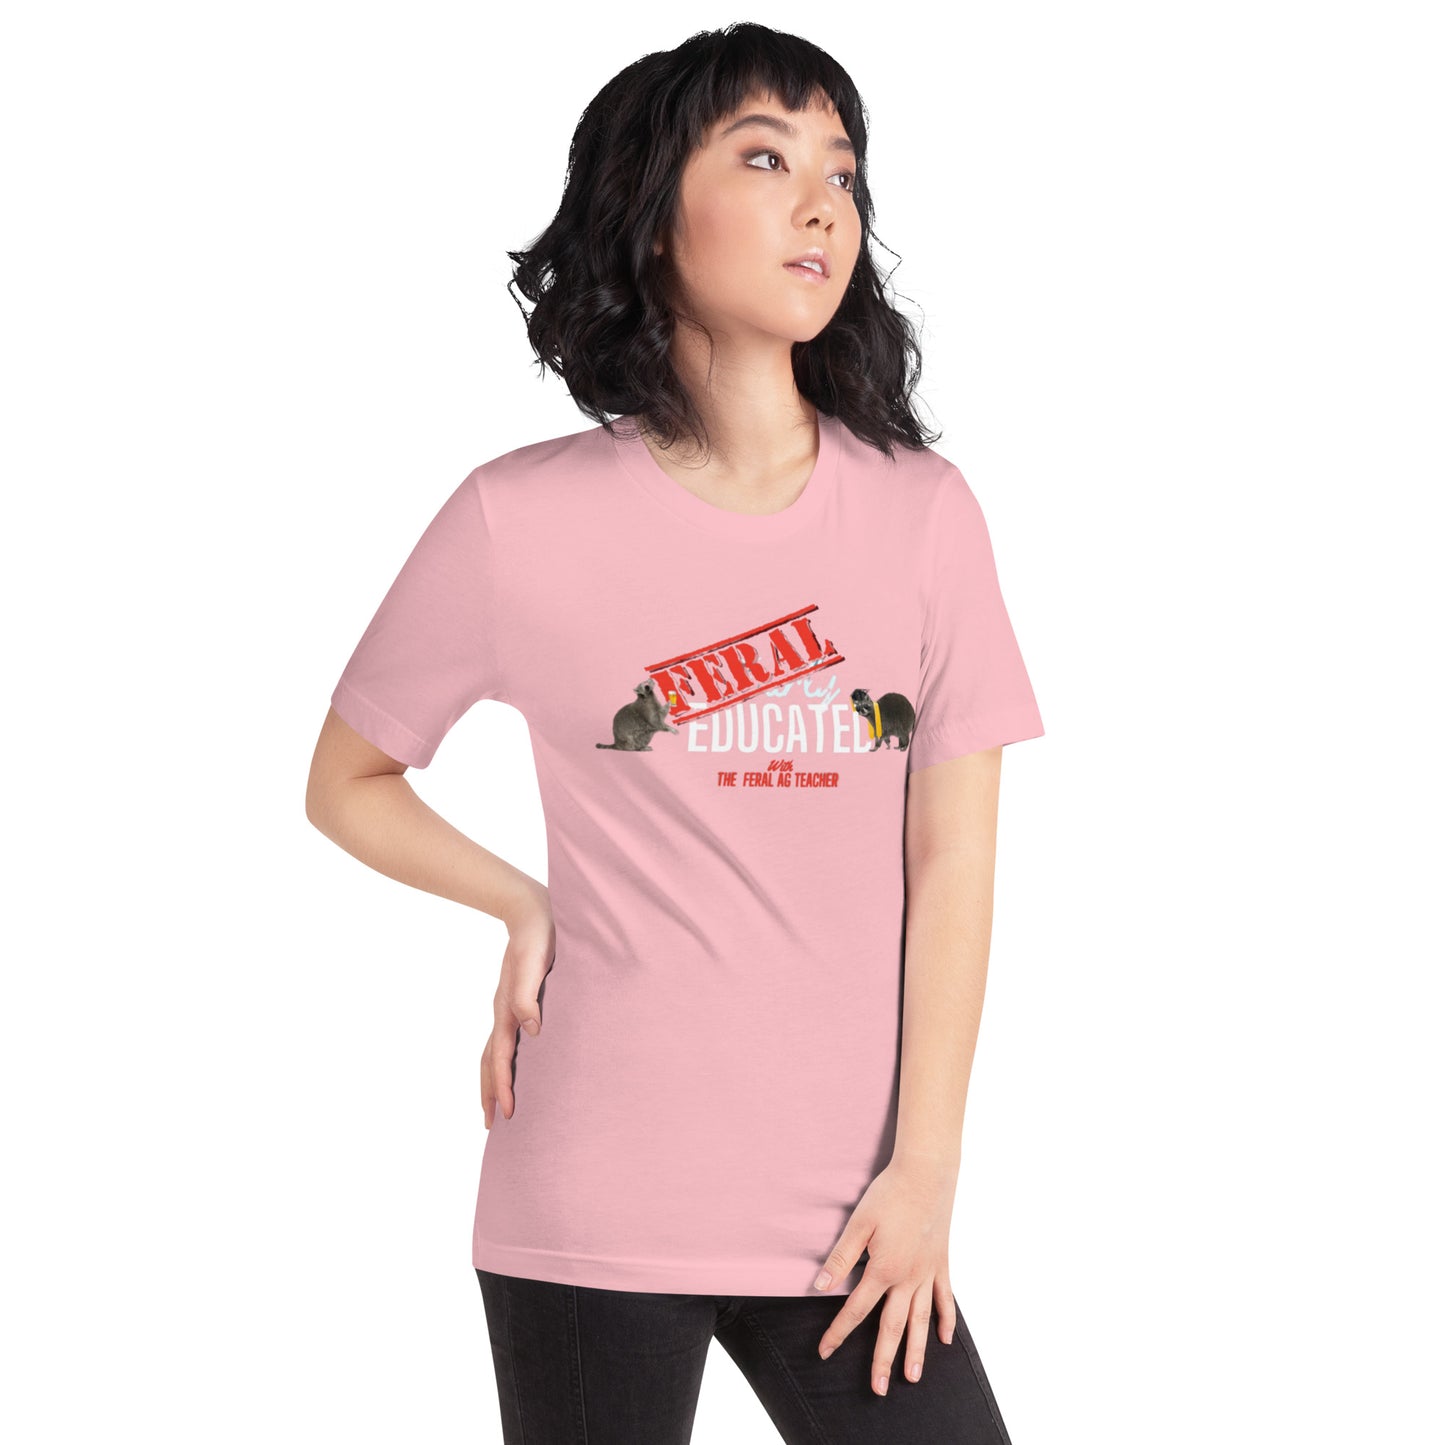 FERAL-ly Educated Unisex t-shirt